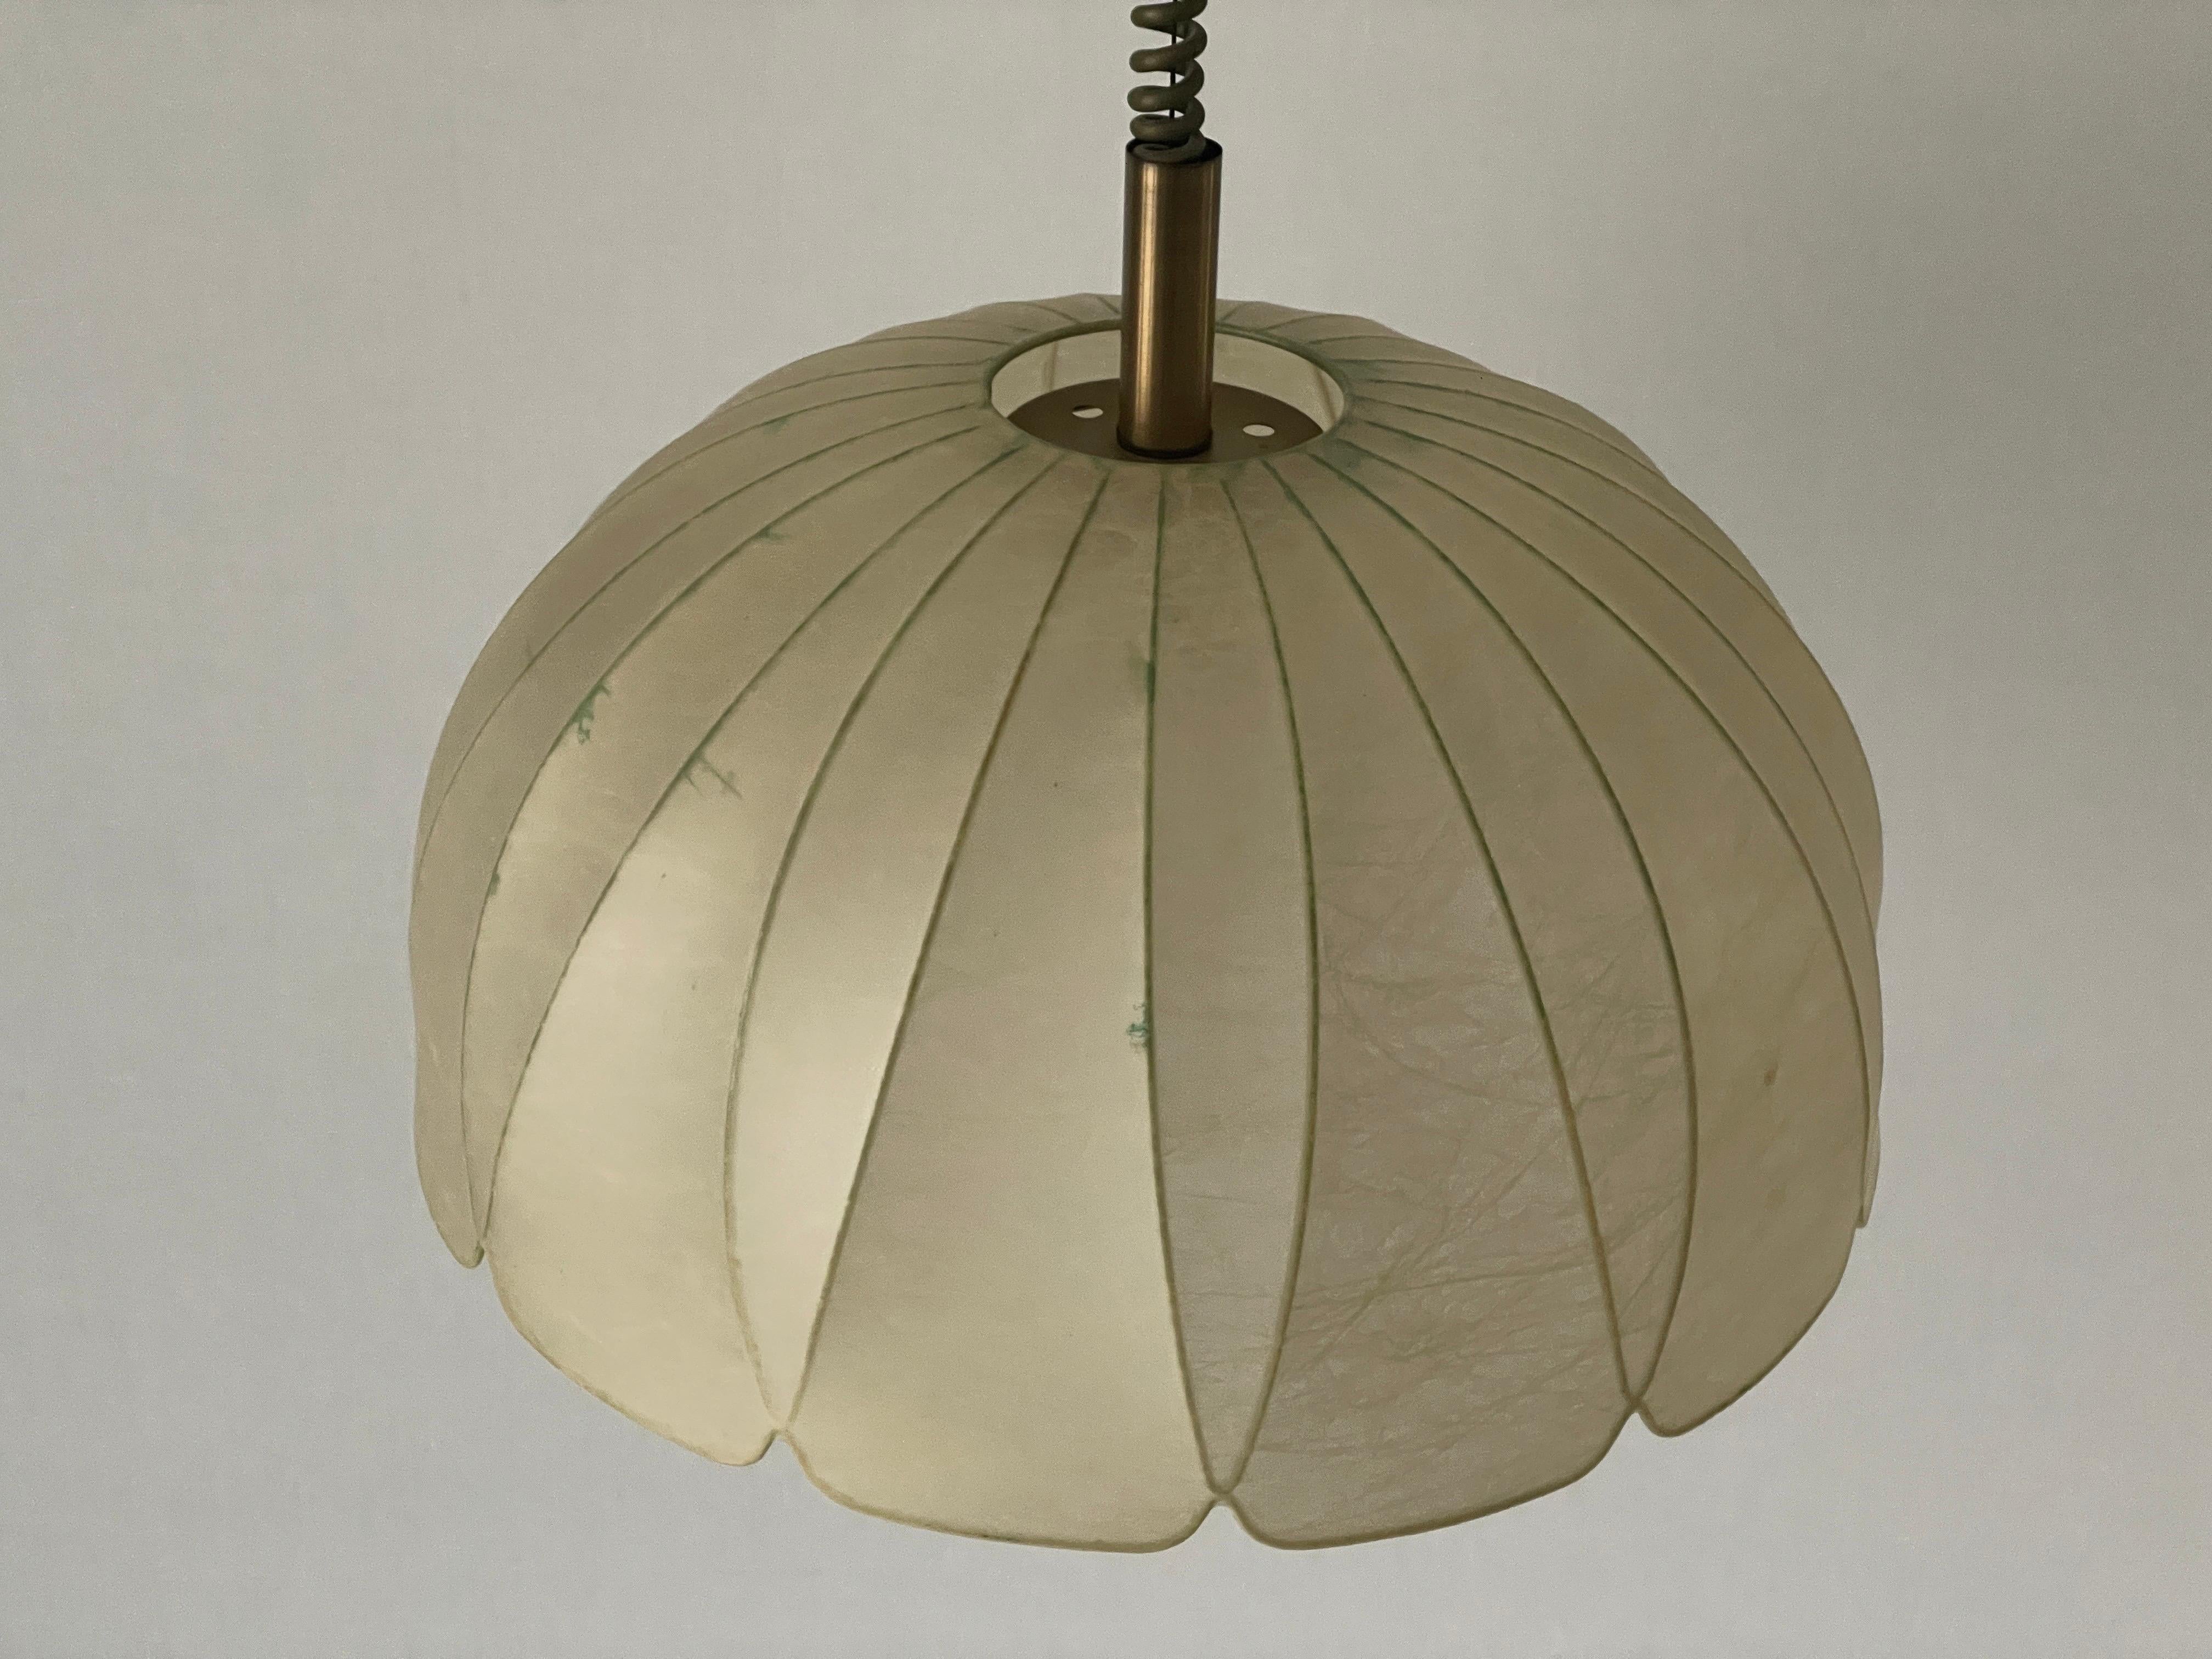 Flower Design Cocoon Adjustable Height Pendant Lamp by Goldkant, 1960s, Germany

Lampshade is in very good vintage condition.

This lamp works with 2x E27 light bulbs. 
Wired and suitable to use with 220V and 110V for all